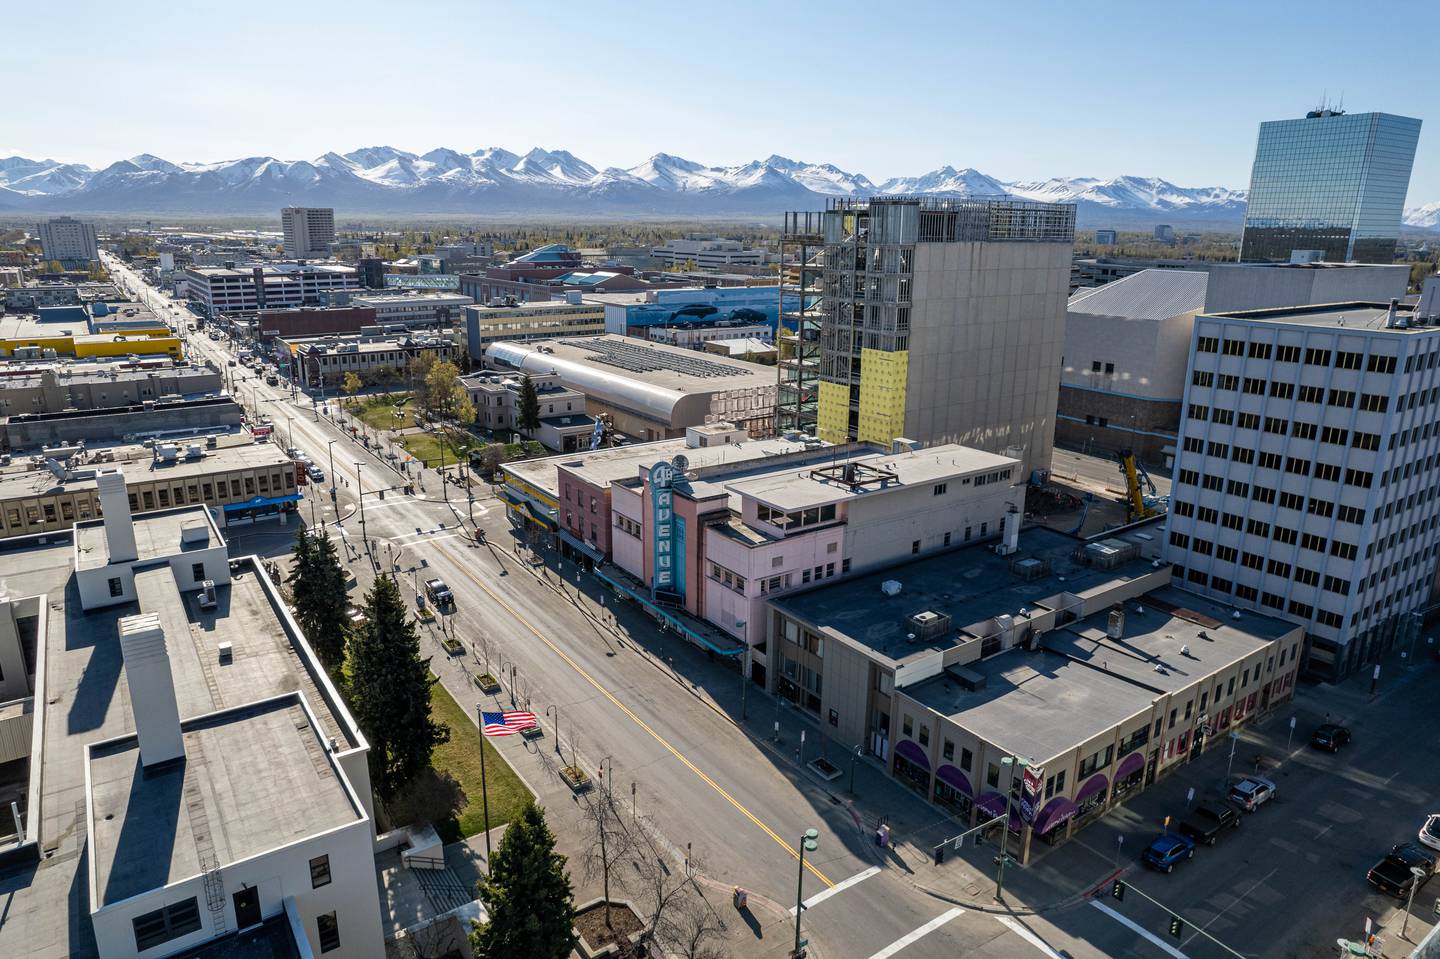 4th Ave, 4th Avenue, 4th Avenue Theater, Anchorage, downtown, downtown Anchorage